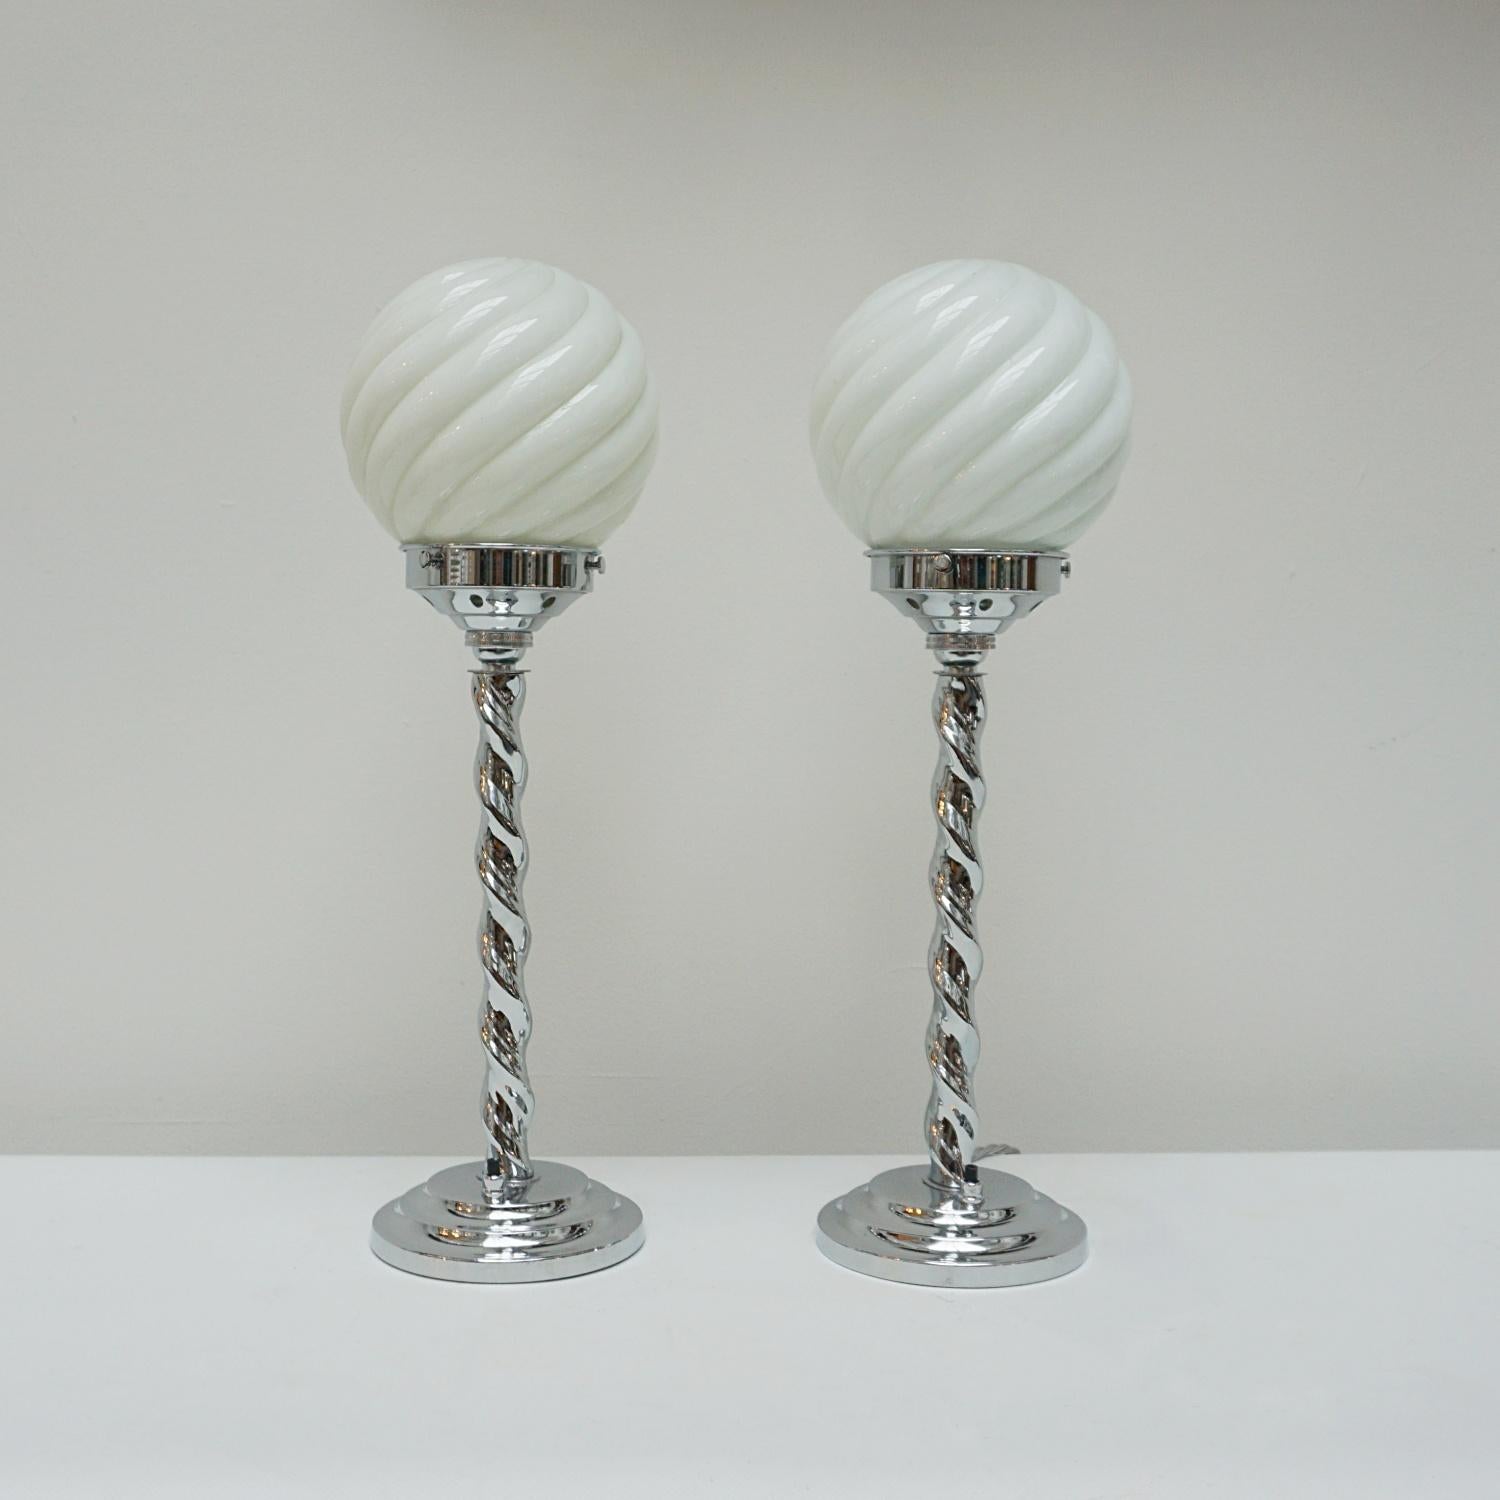 A pair of Art Deco table lamps. Chromed metal barley twist stem, set over stepped circular base. White spiral globe shades. 

Dimensions: H 49cm 

Origin: English

Item Number: J292

All of our lighting is fully refurbished, re-wired, and re-chromed